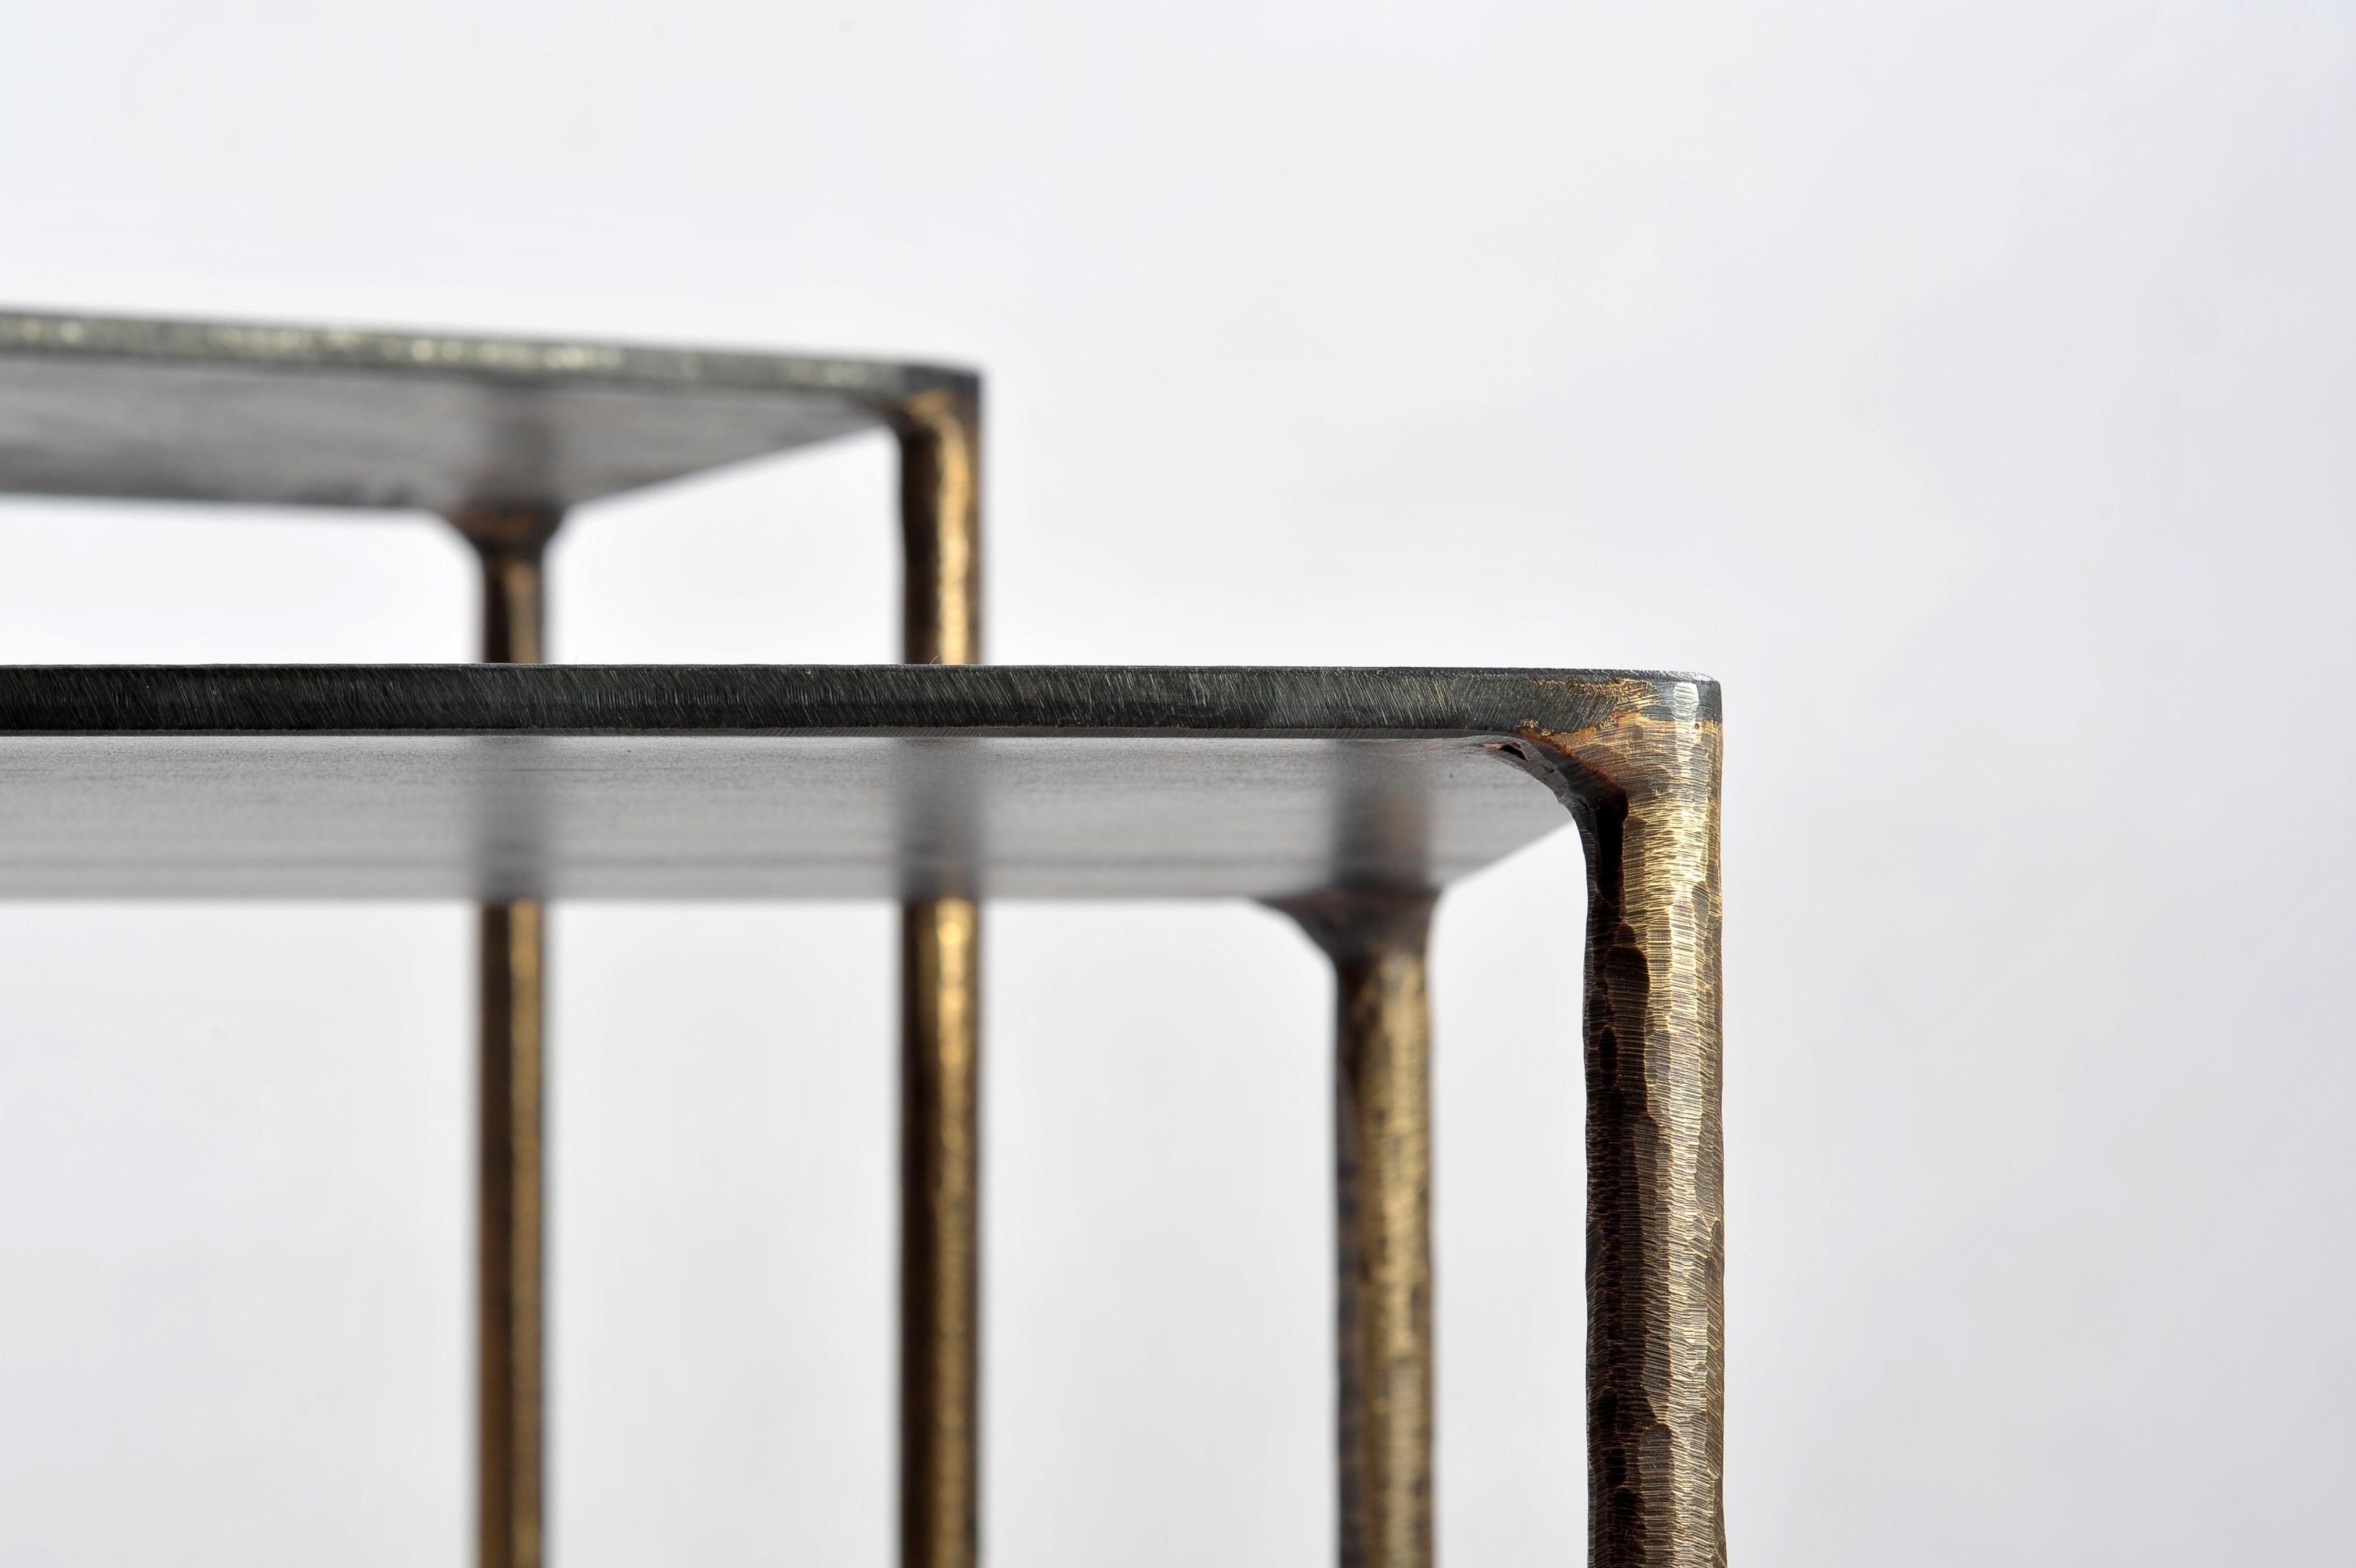 Brass side table signed by Lukasz Friedrich
Textured side or coffee table
Materials: Legs, patinated brass; top, patinated and waxed steel
Dimensions: 
D 28 cm, L 38 cm, H 50 cm
D 38 cm, L 68 cm, H 40 cm
Signed and dated

Lukasz Friedrich (born